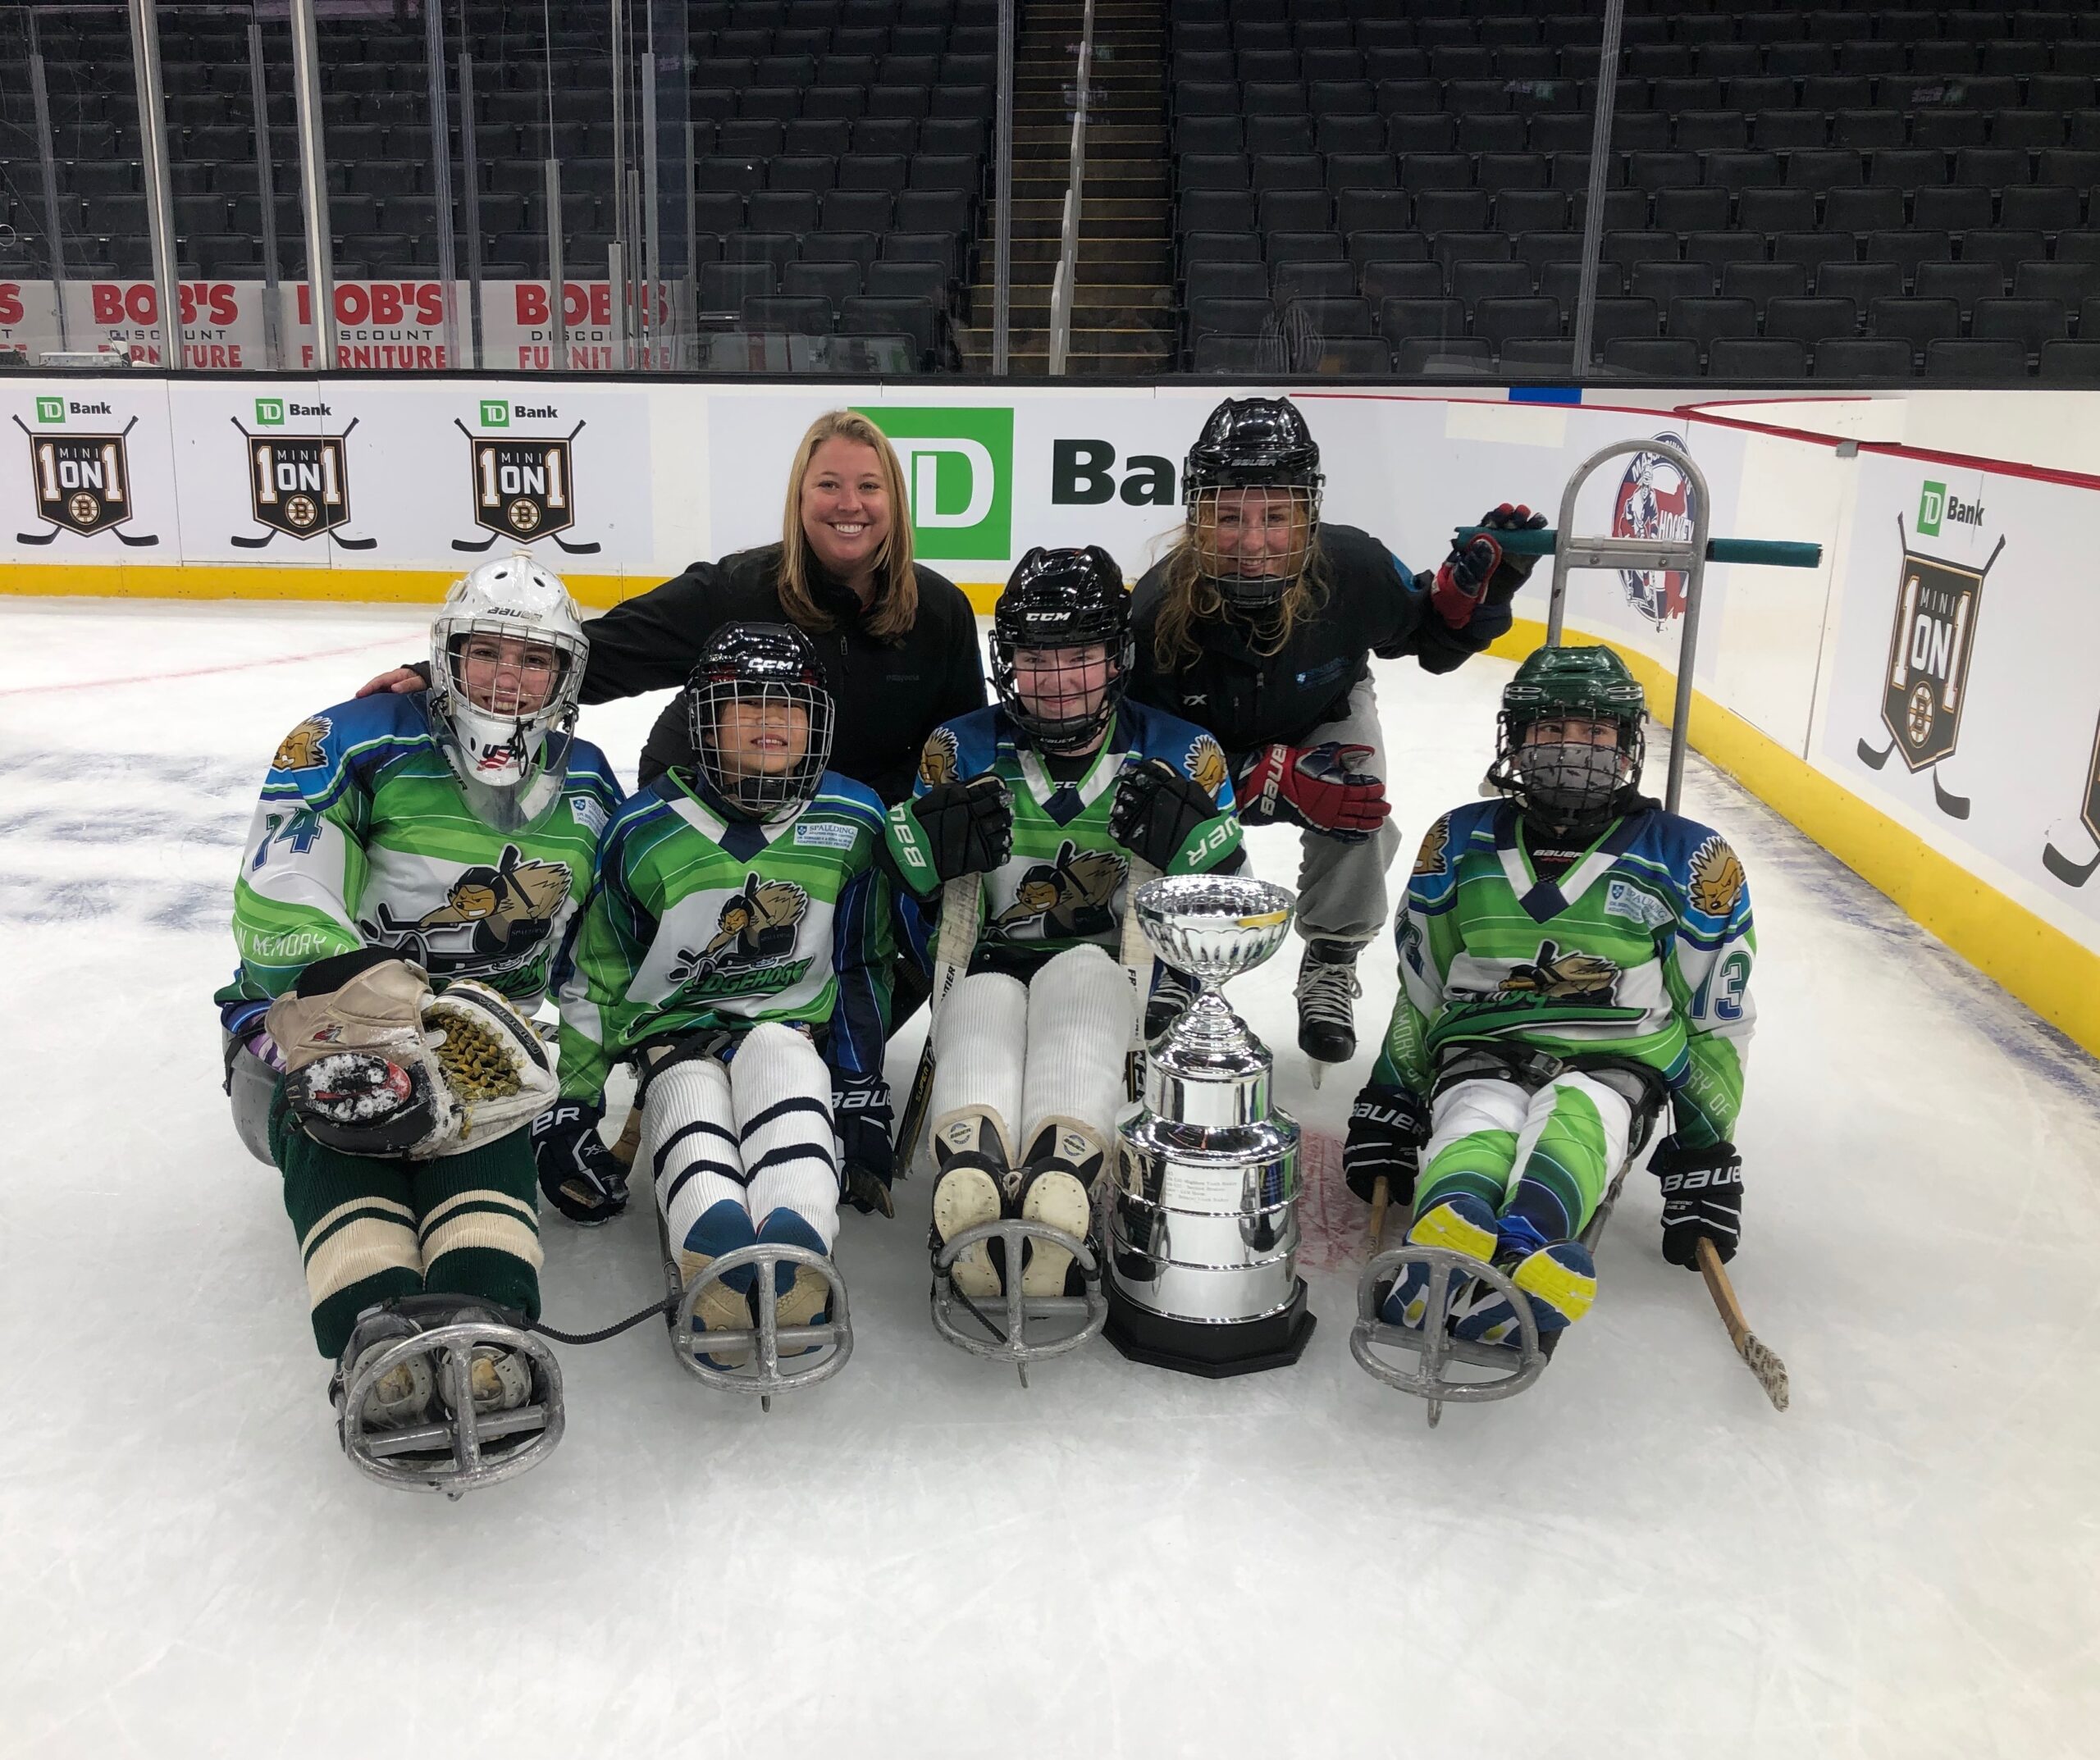 Madeline Cushing and hockey team in gear on ice skating rink 